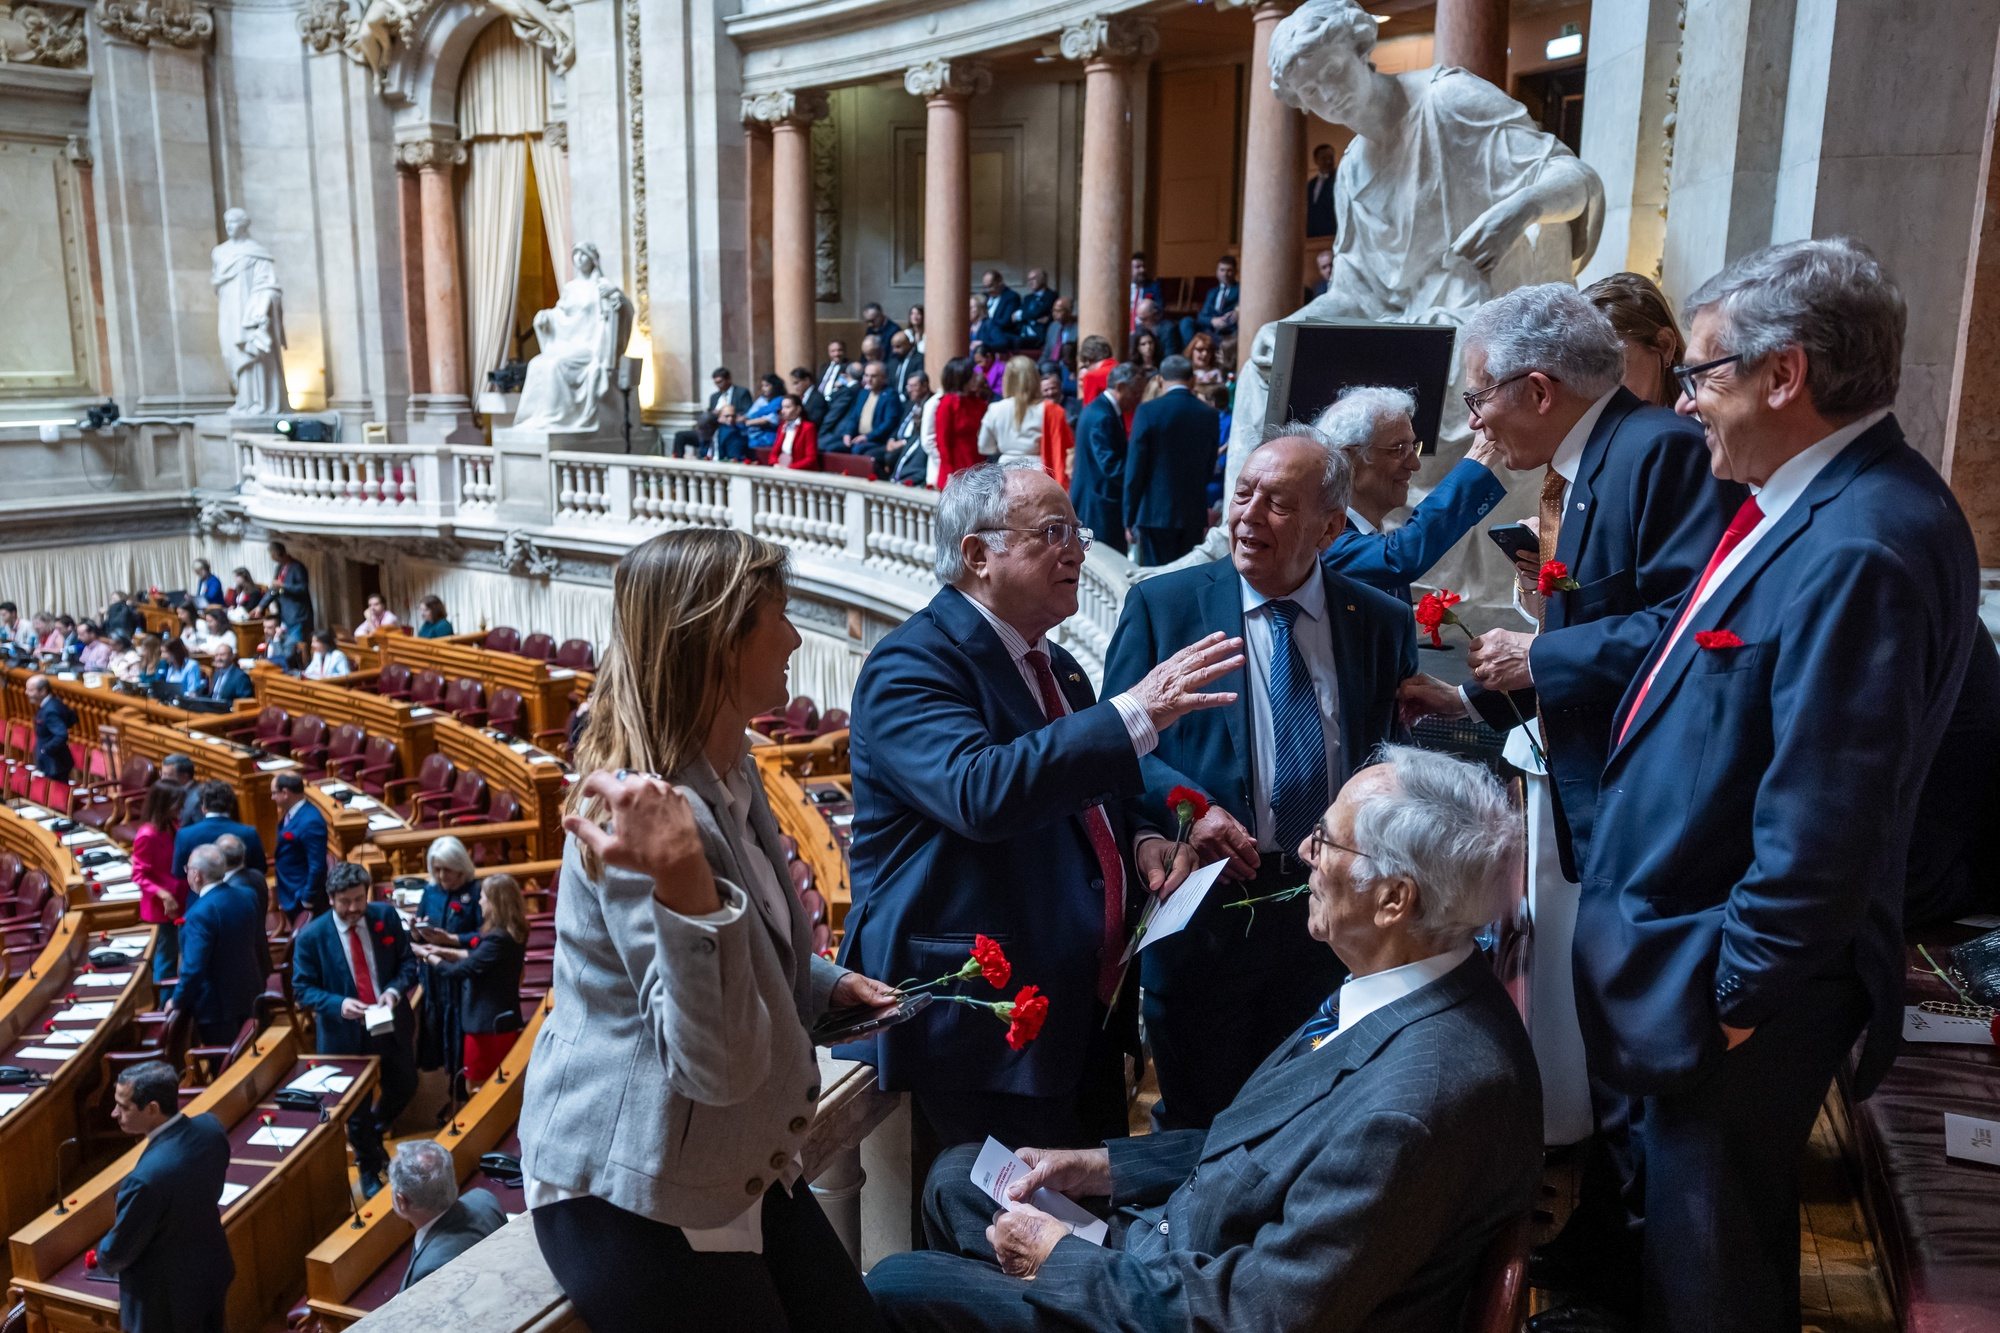 The president of 25th April Association, Vasco Lourenco (2-L), attends a solemn comemorative session at the Portuguese parliament in Lisbon, Portugal, 25 April 2024. Portugal celebrates the 50th anniversary of the Carnation Revolution that ended the authoritarian regime of Estado Novo (New State) that ruled the country between 1926 to 1974. JOSE SENA GOULAO/LUSA